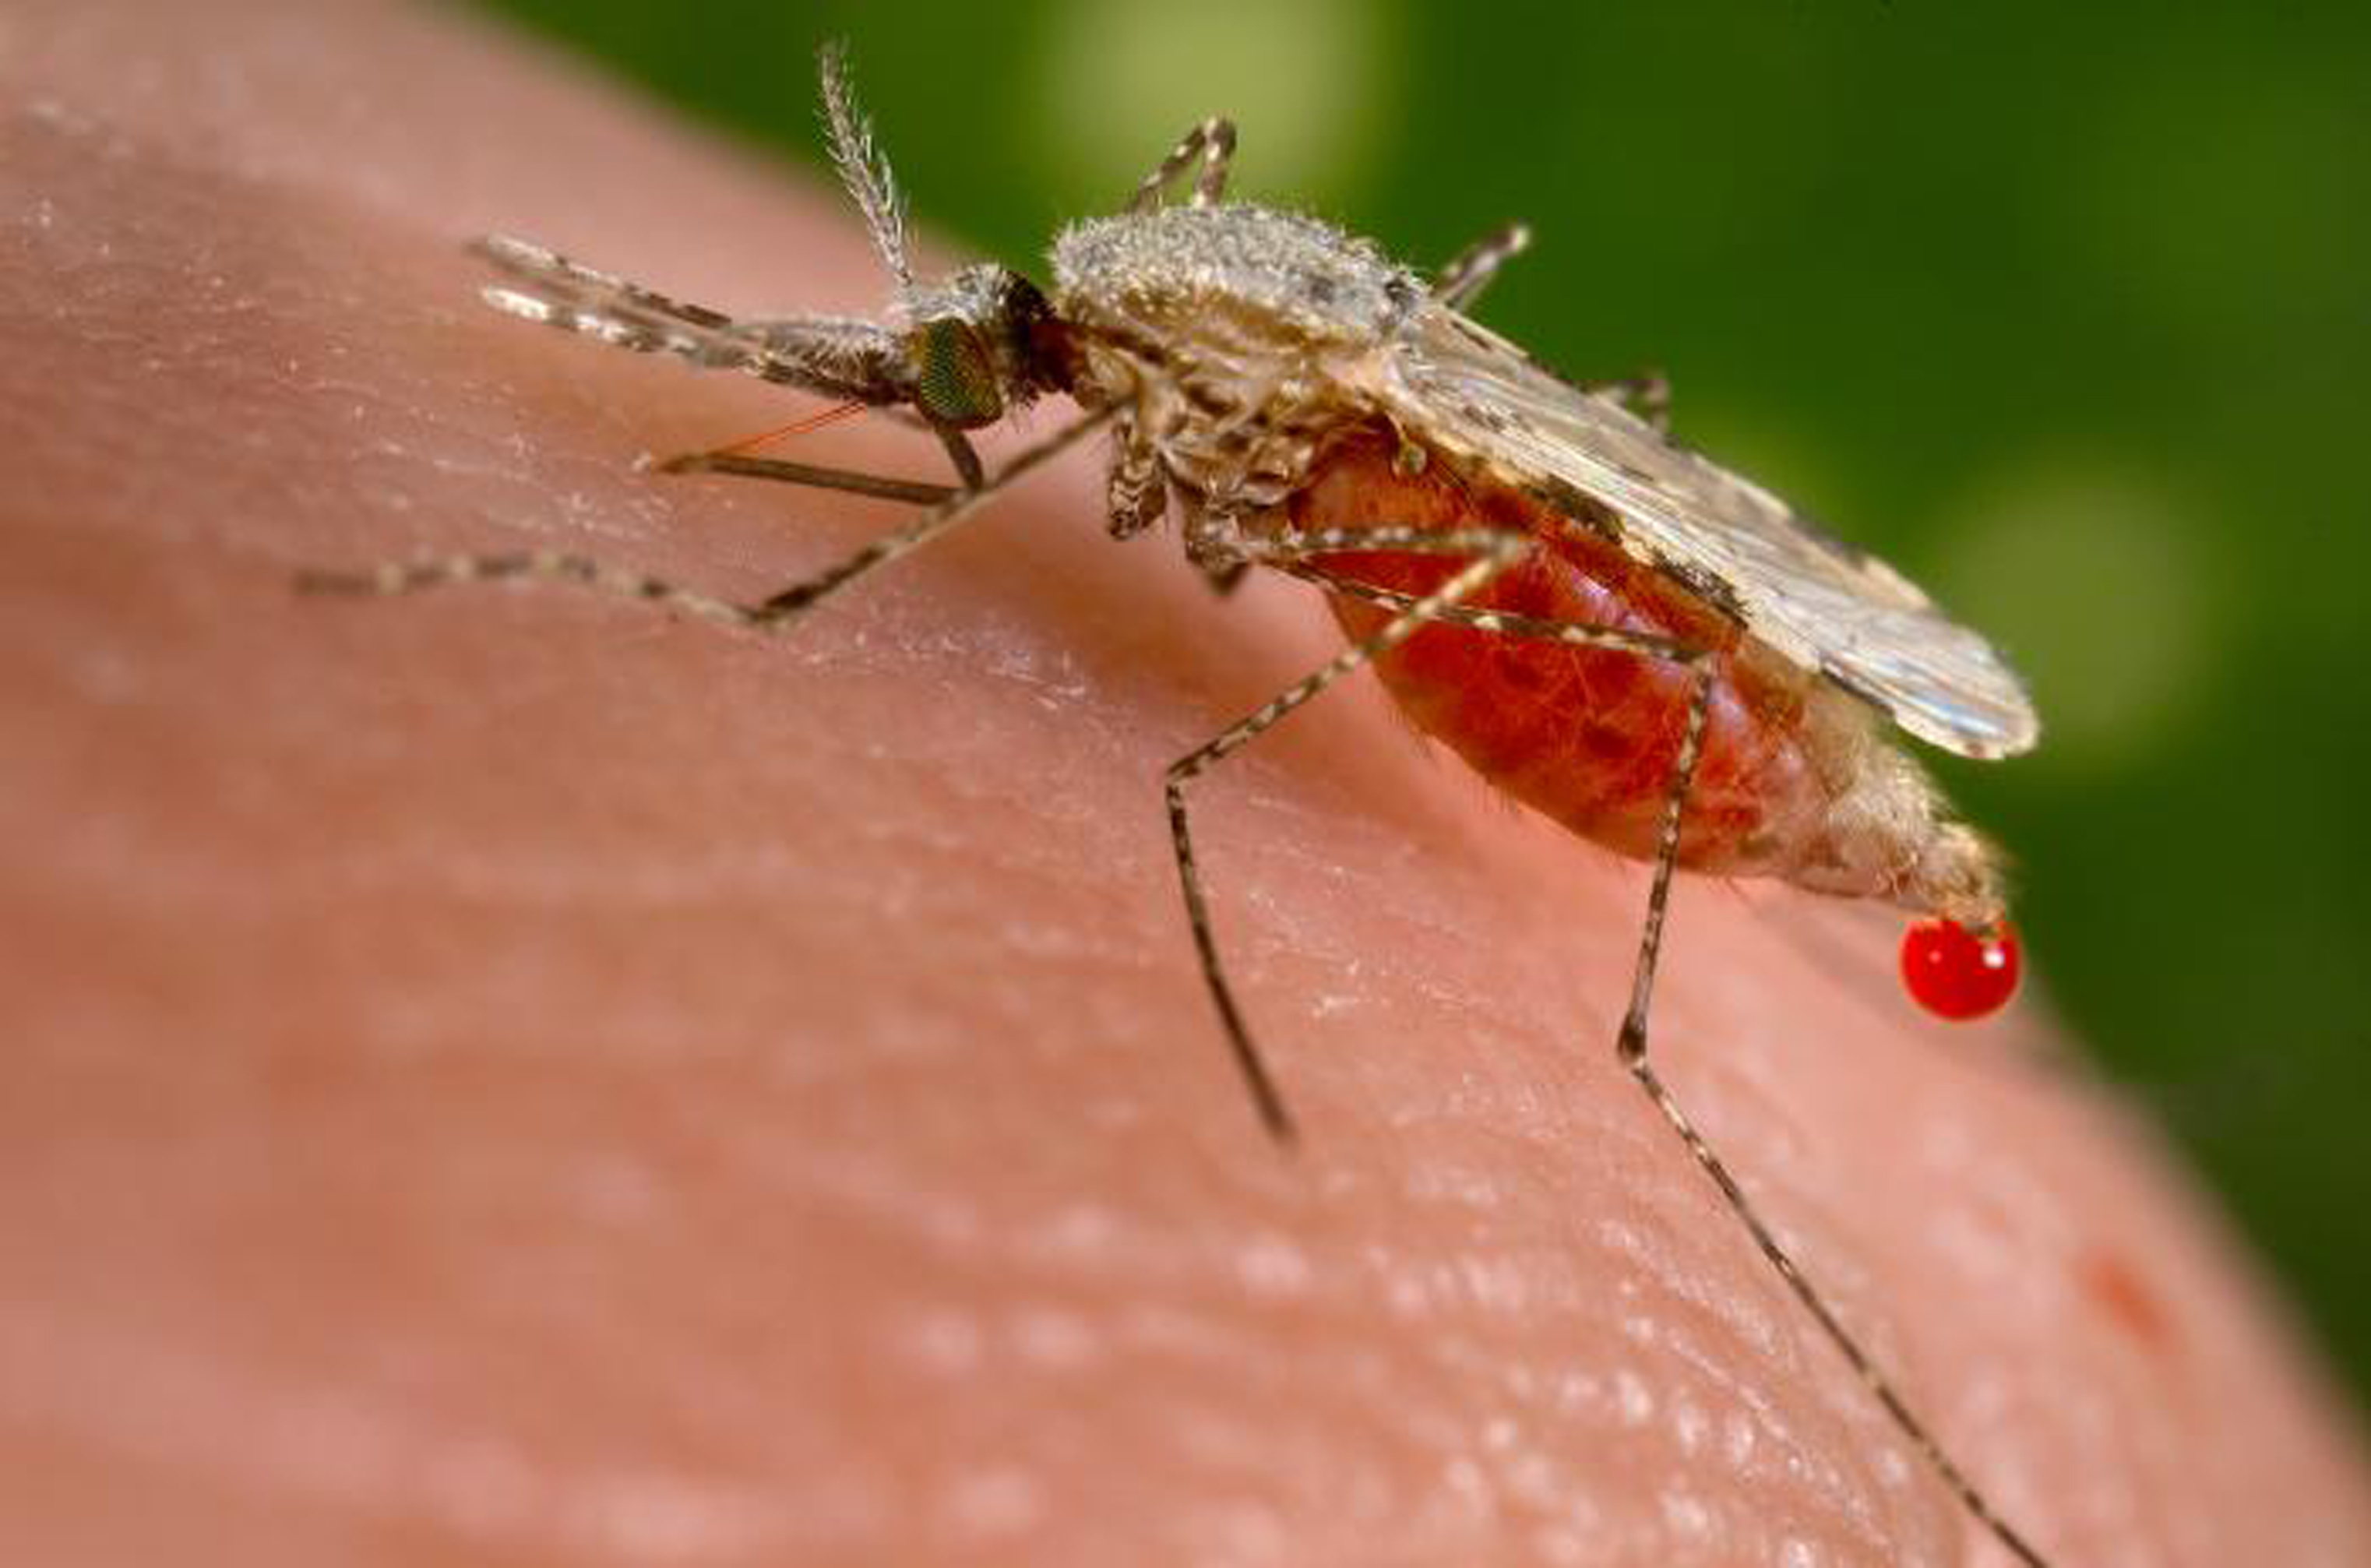 Mosquito feeds on human host.